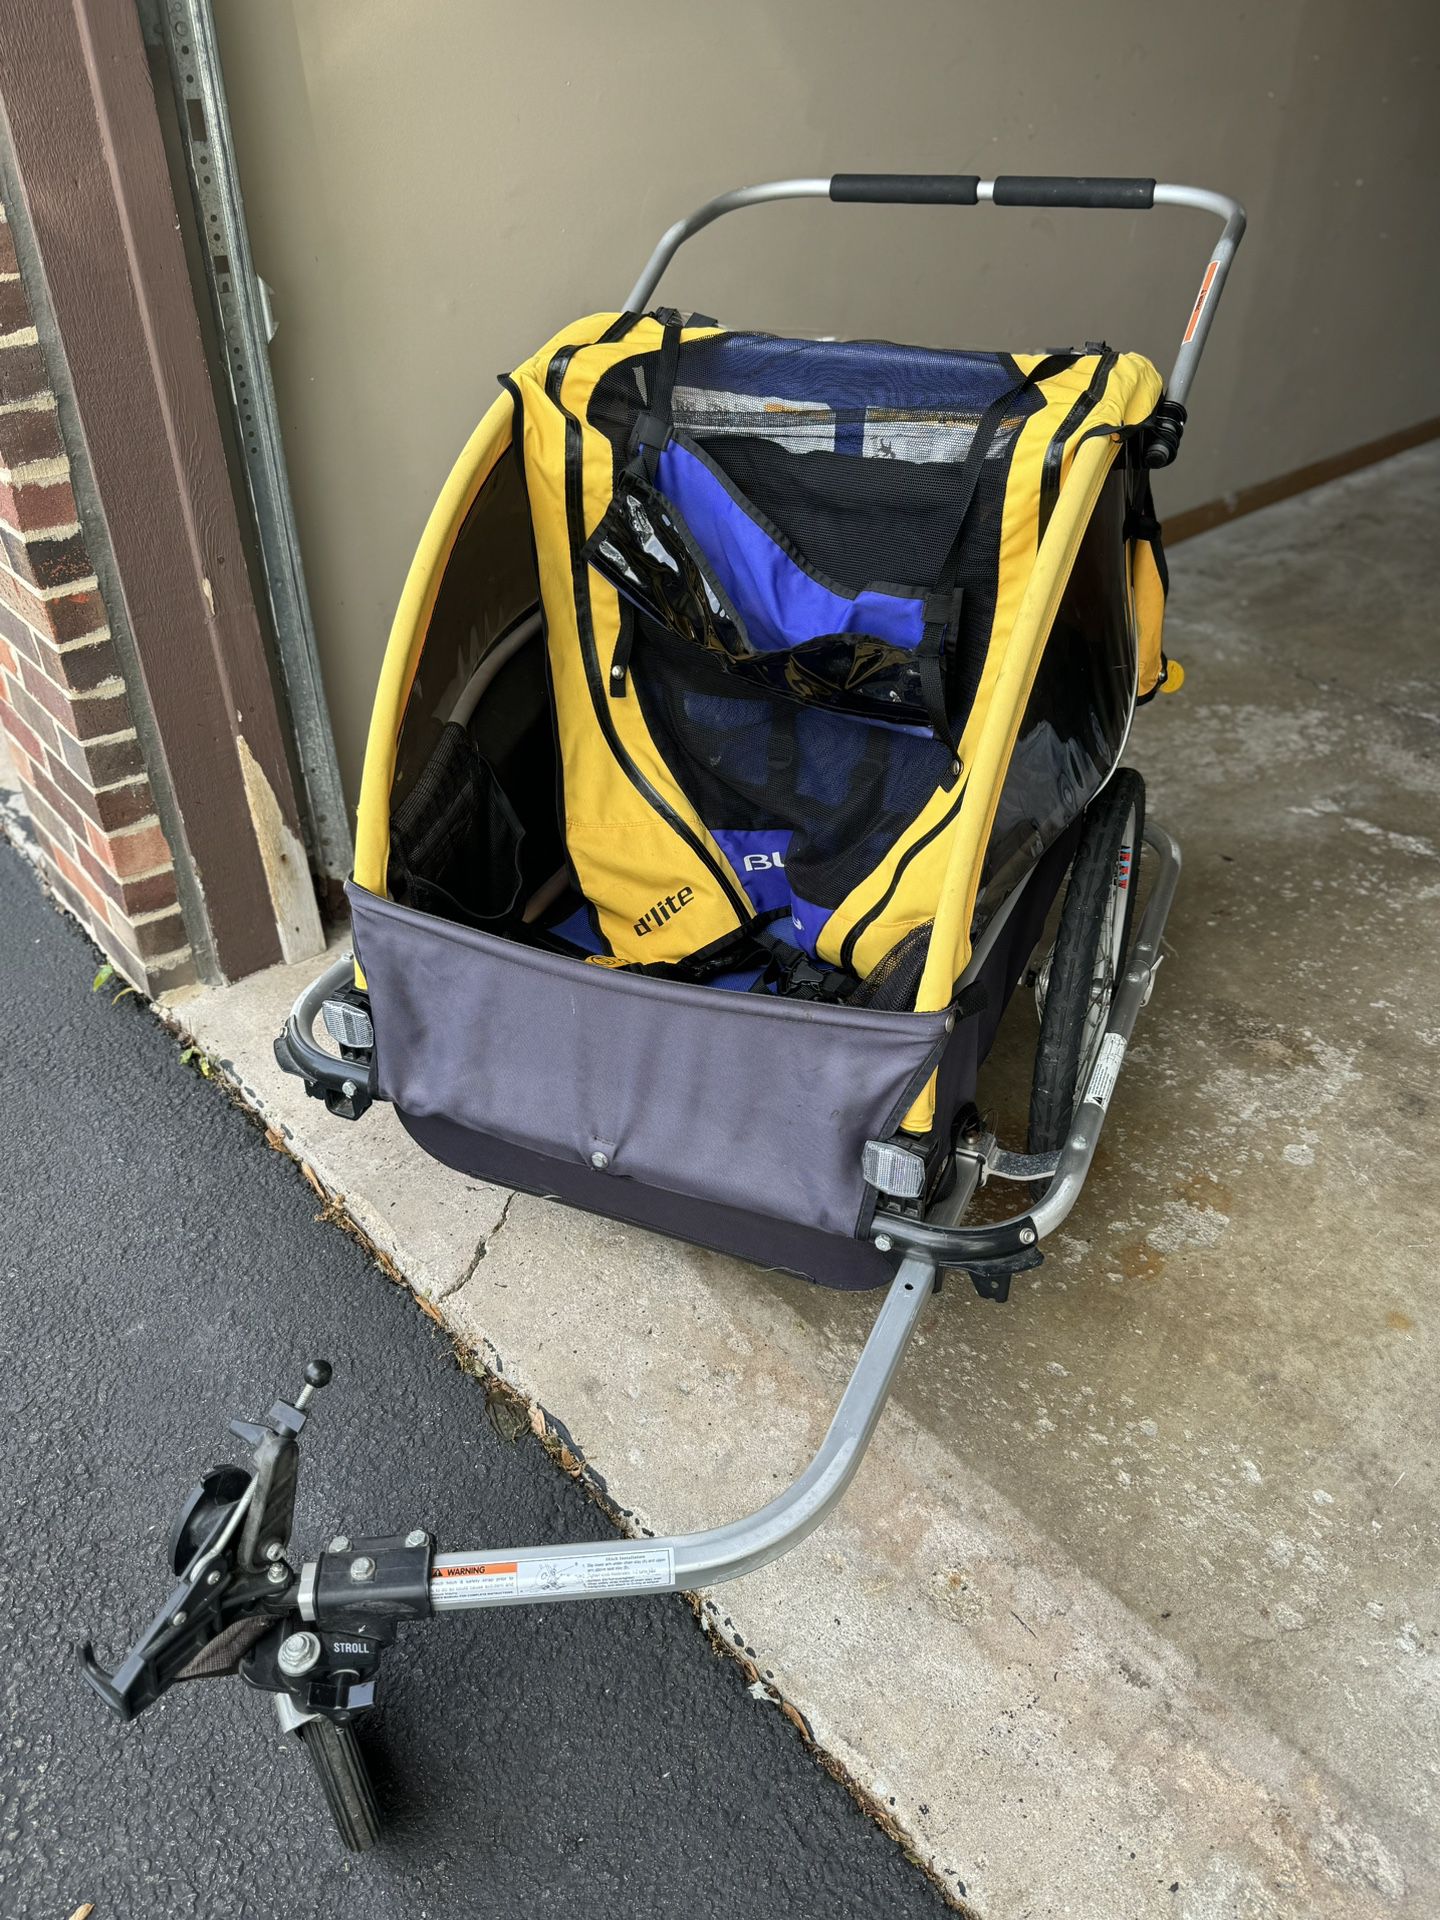  Bicycle Trailer For Kids